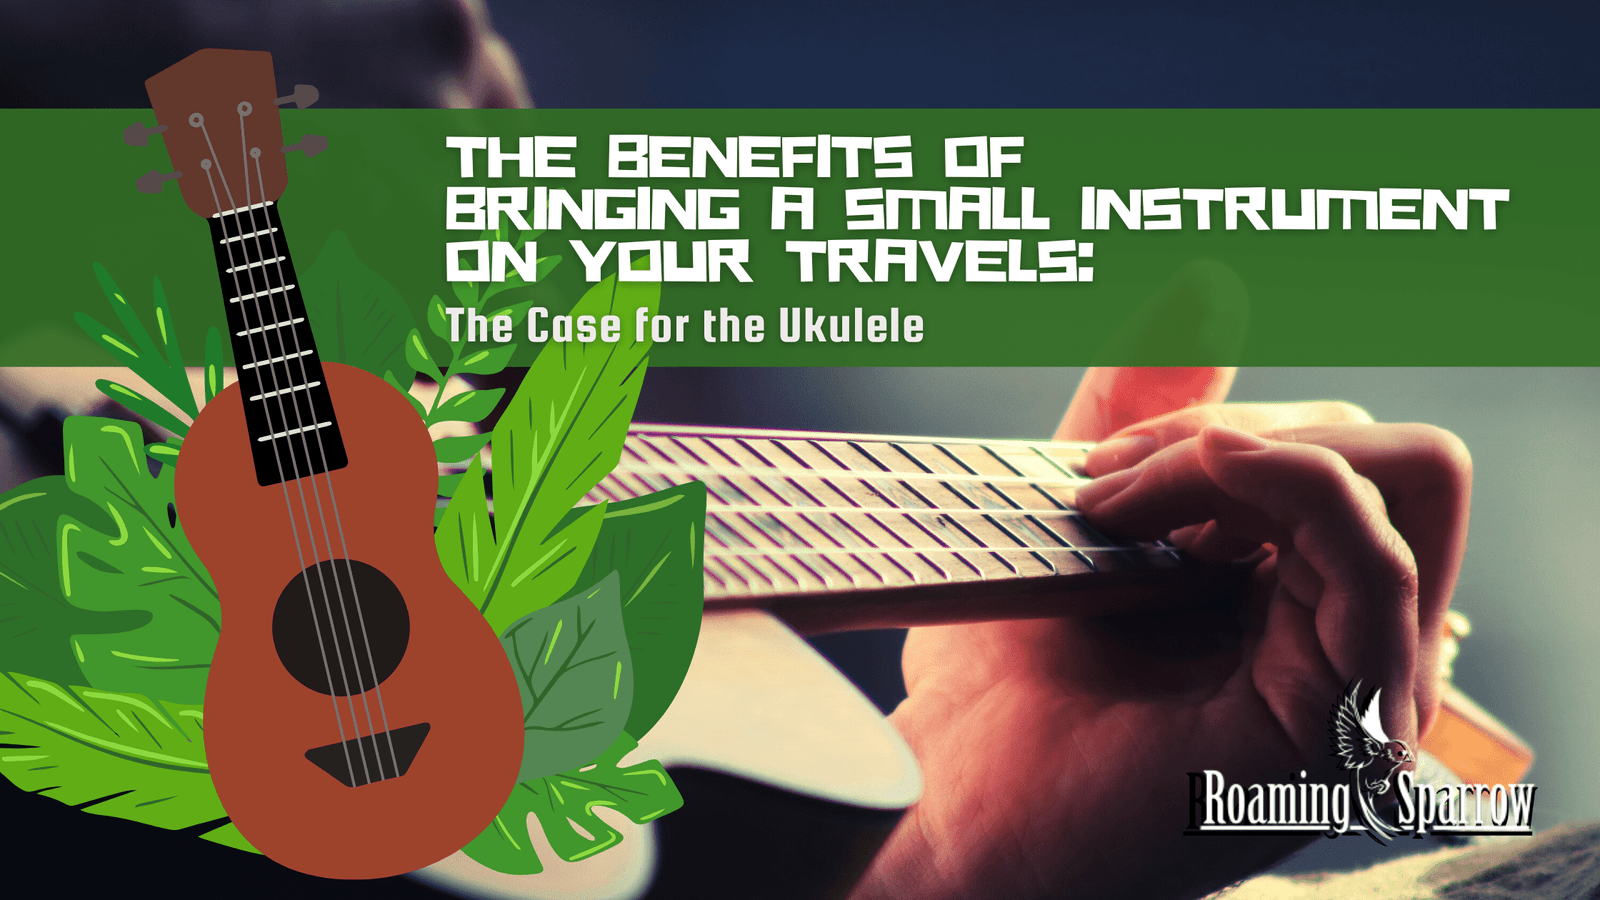 The Benefits of Bringing a Small Instrument on Your Travels: The Case for the Ukulele